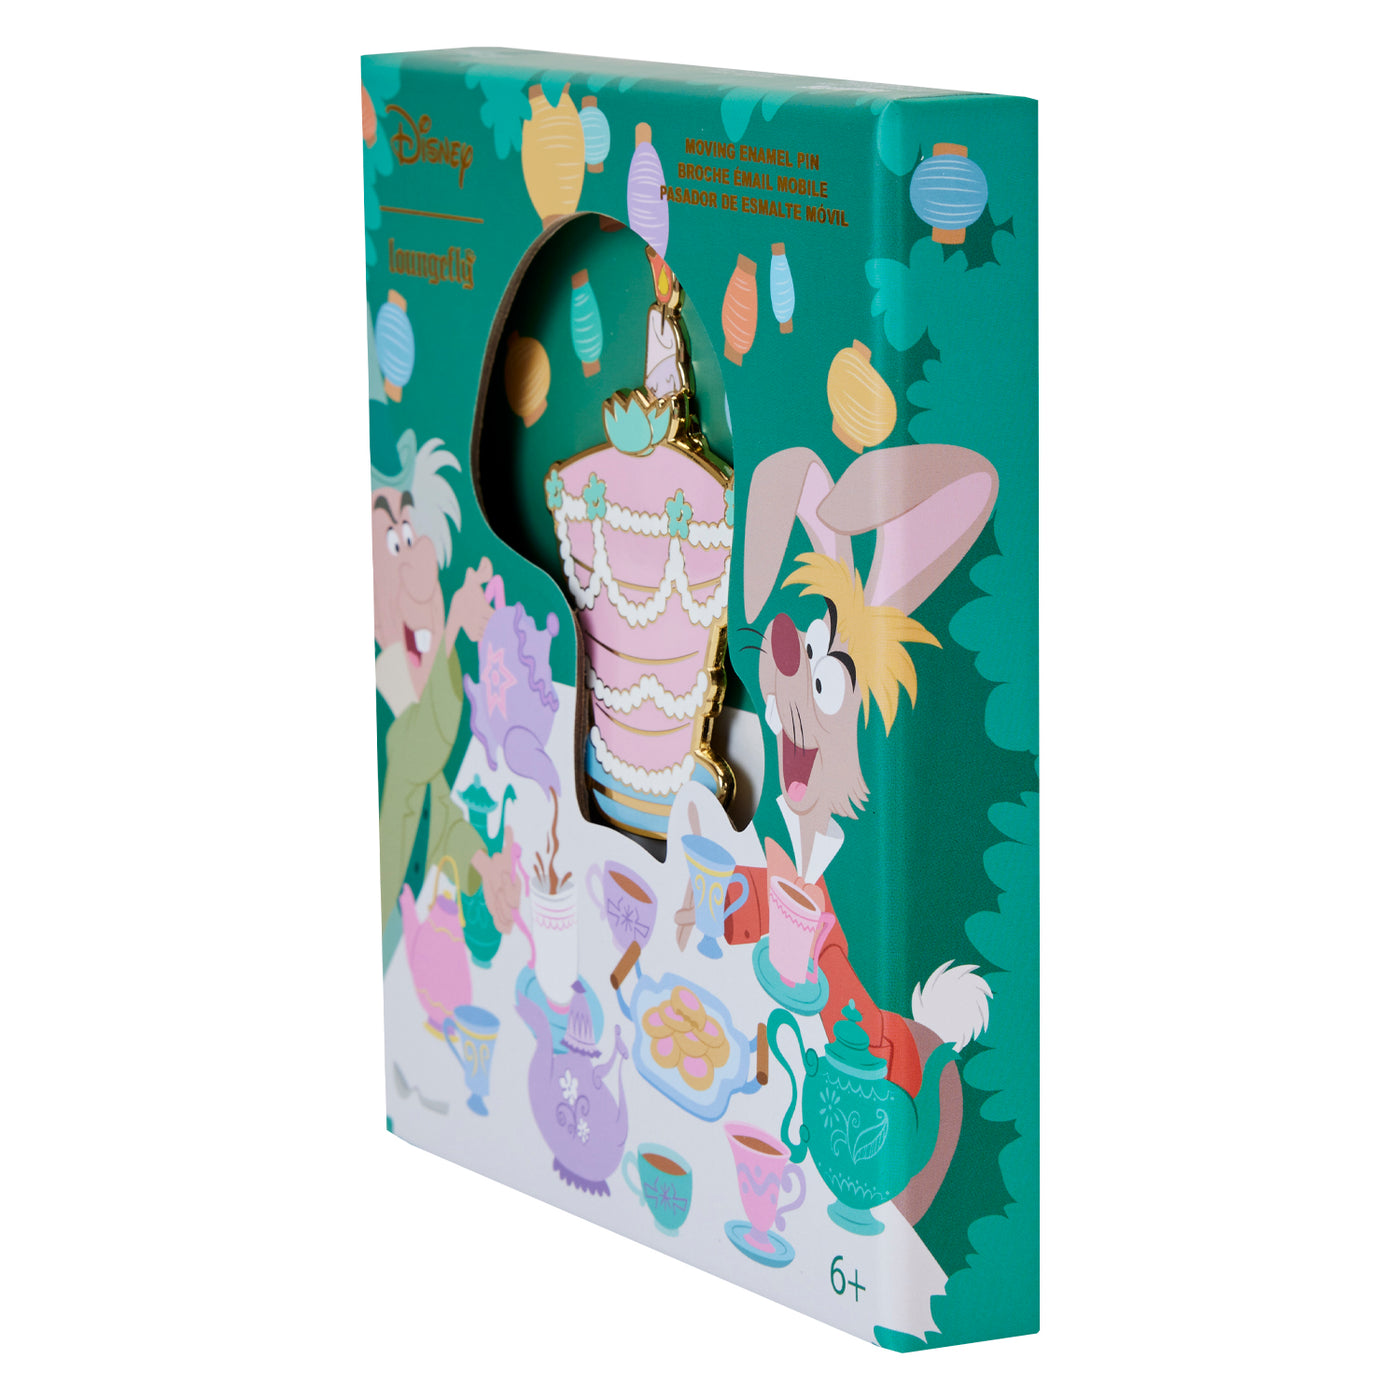 Loungefly Disney Alice in Wonderland Unbirthday Cake Sliding 3" Collector's Box Pin Limited Edition